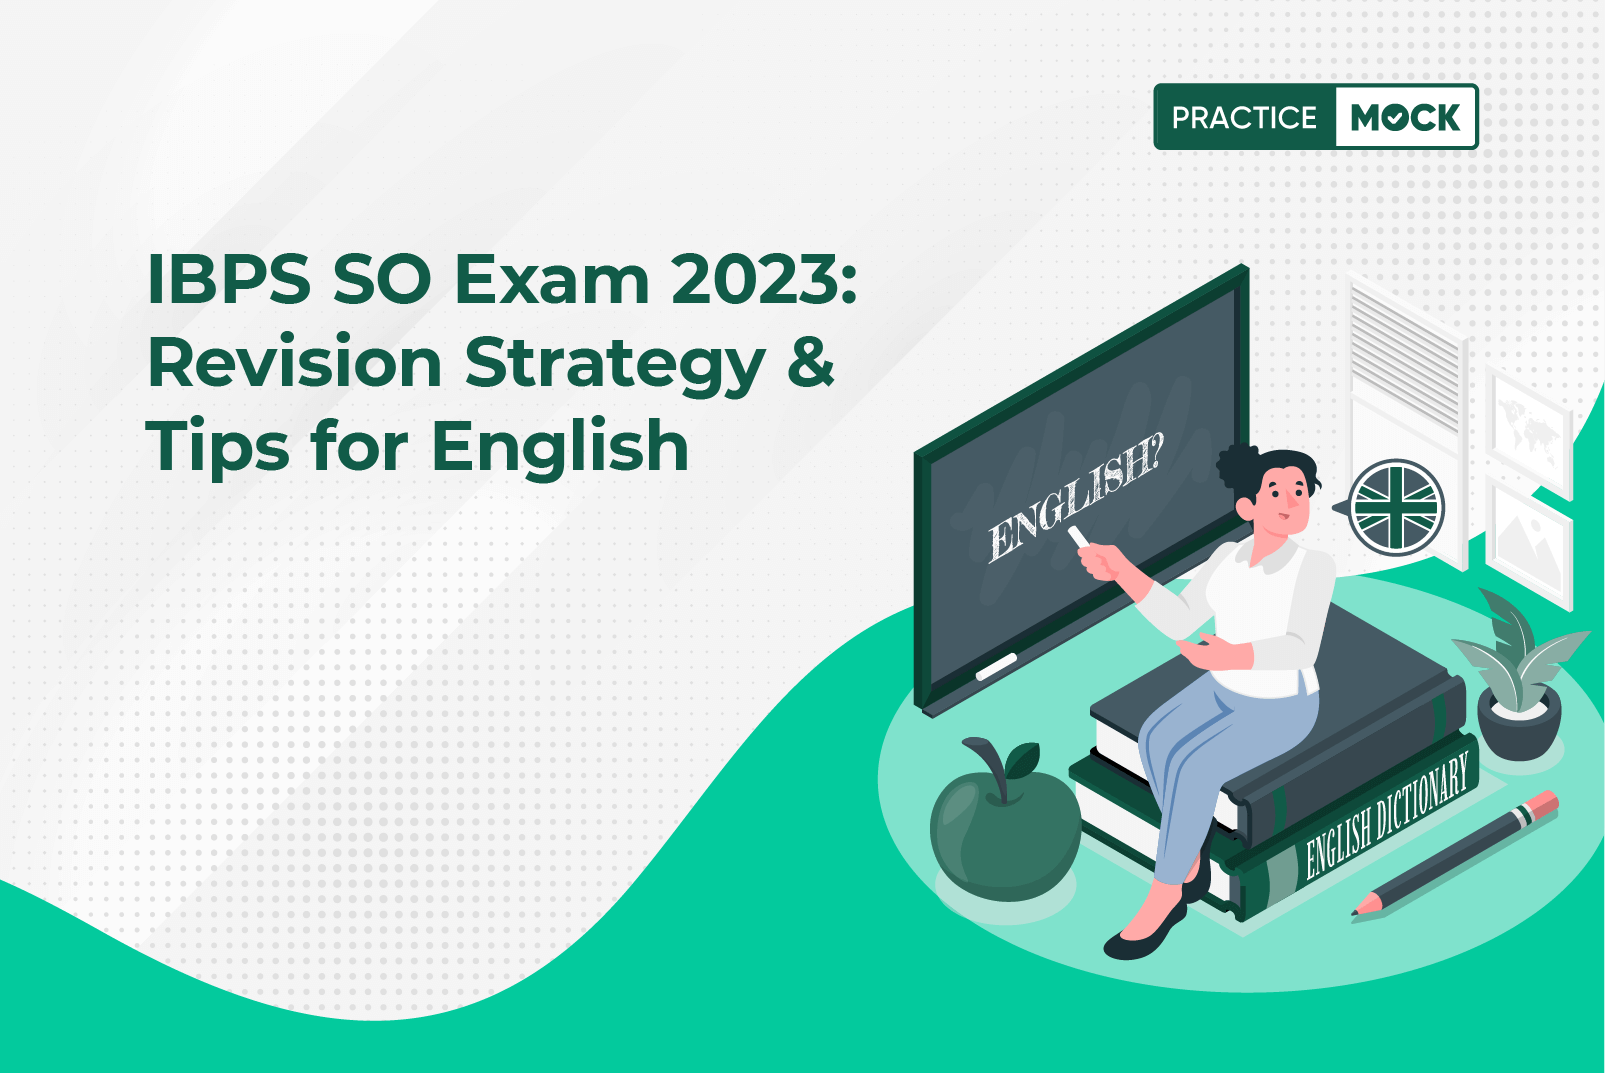 IBPS SO Exam 2023 Revision Strategy & Tips for English